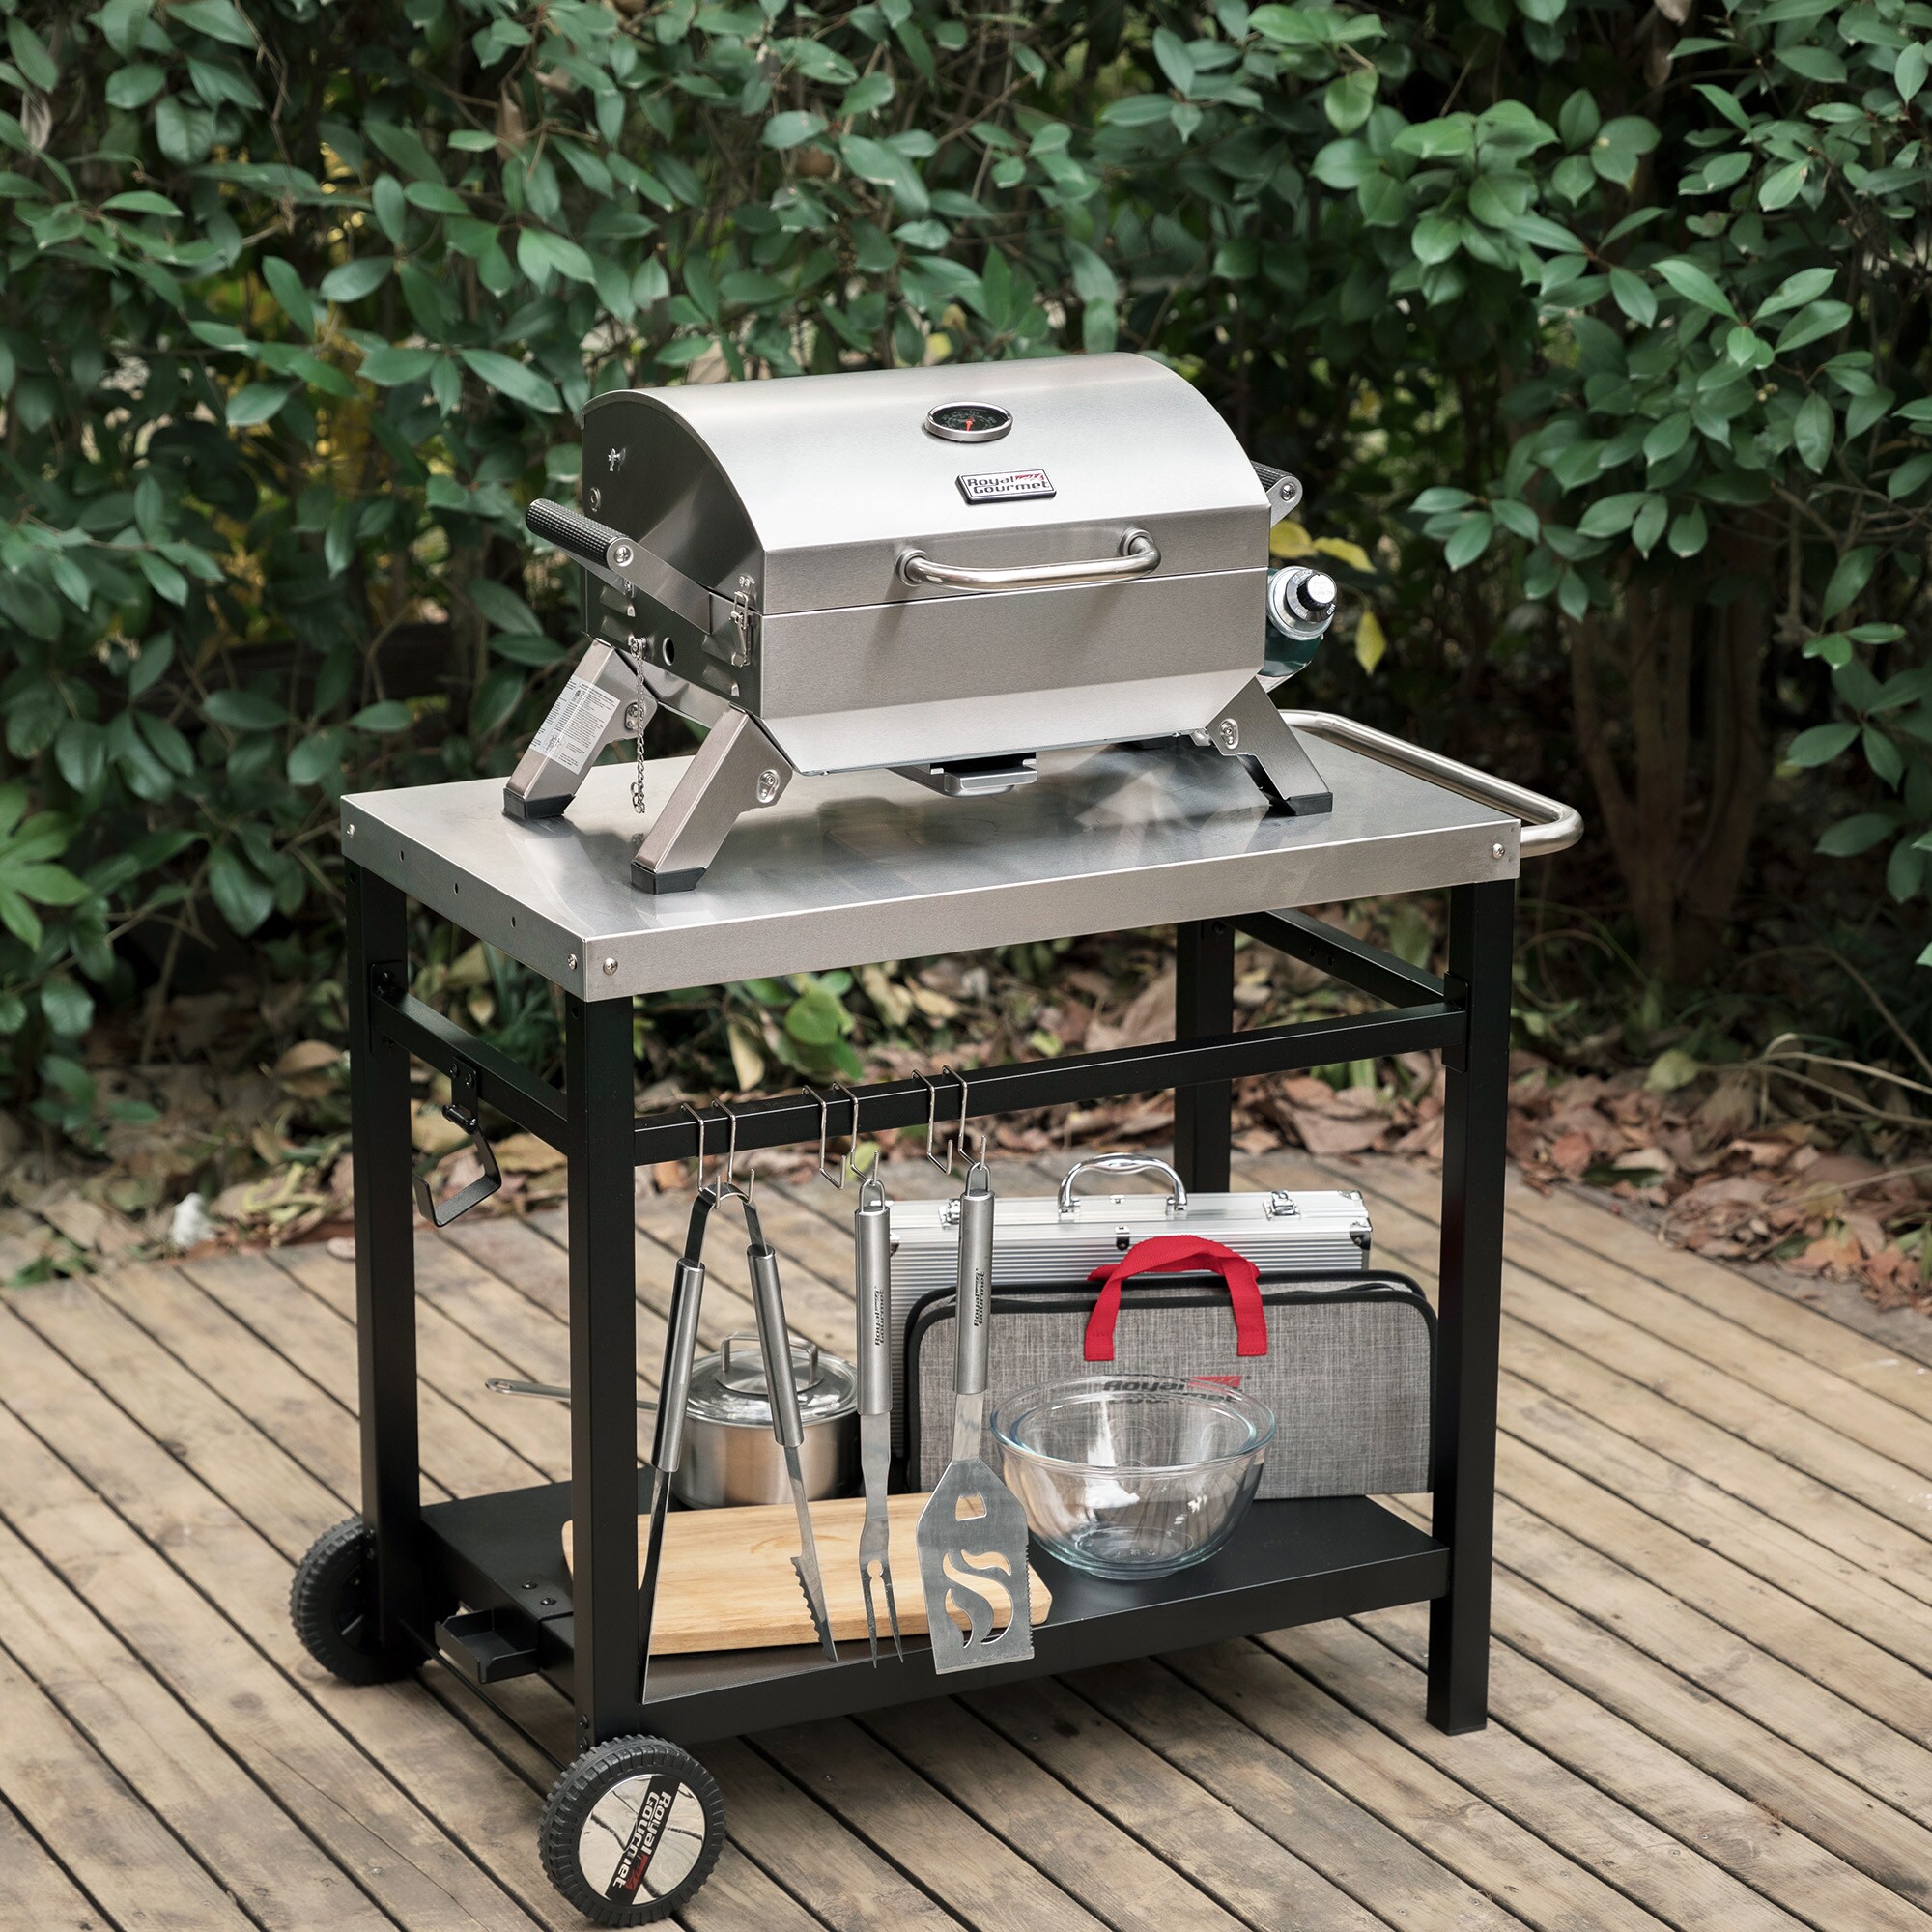 Lowe's sale has great deals on grills, patio furniture, grill accessories 